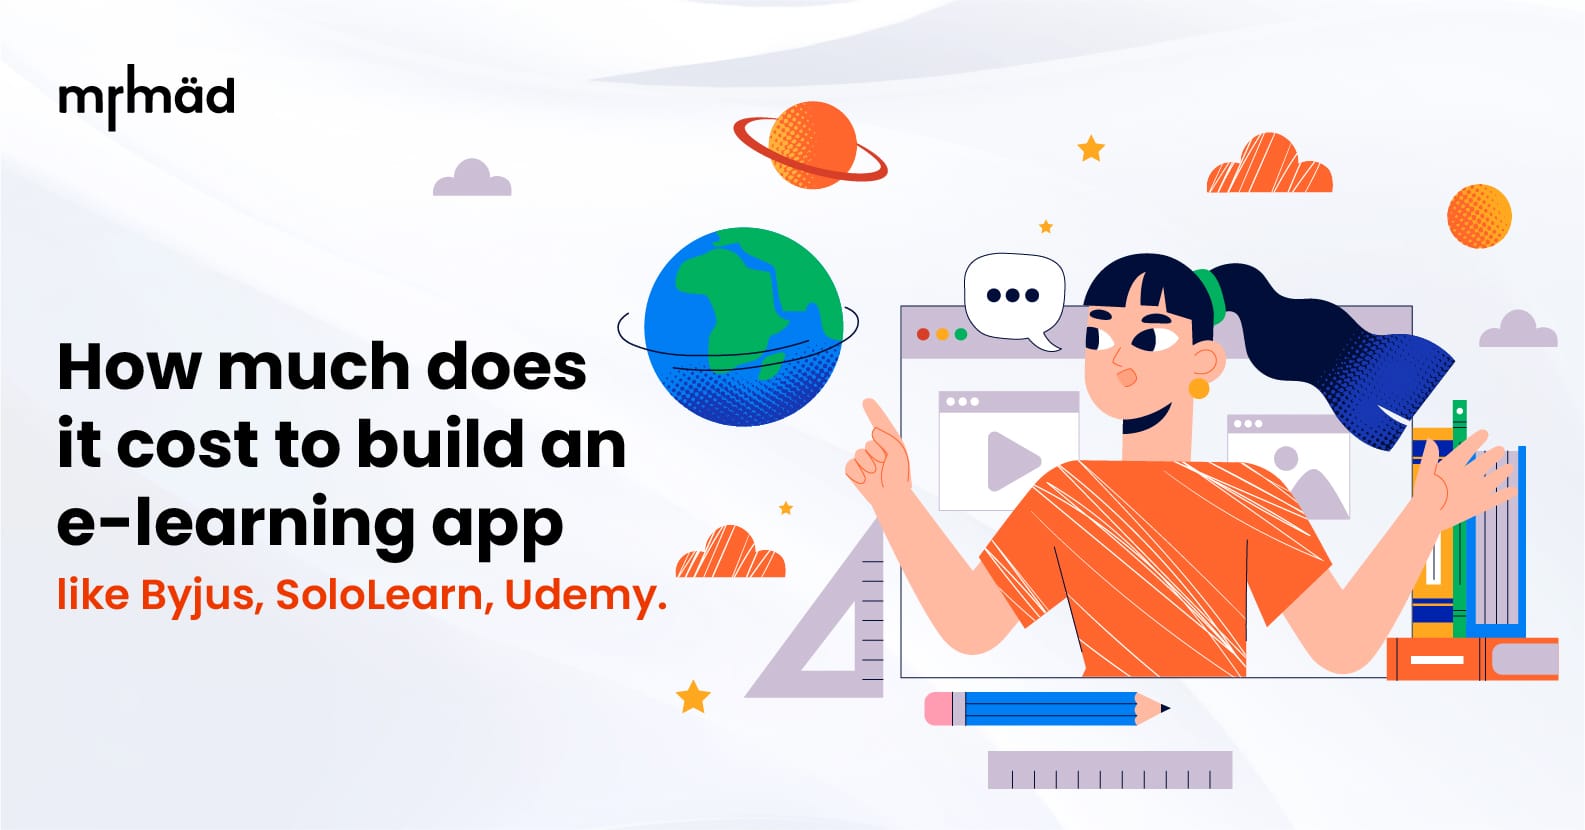 How much does it cost to build an e-learning app like Byjus, SoloLearn, Udemy.